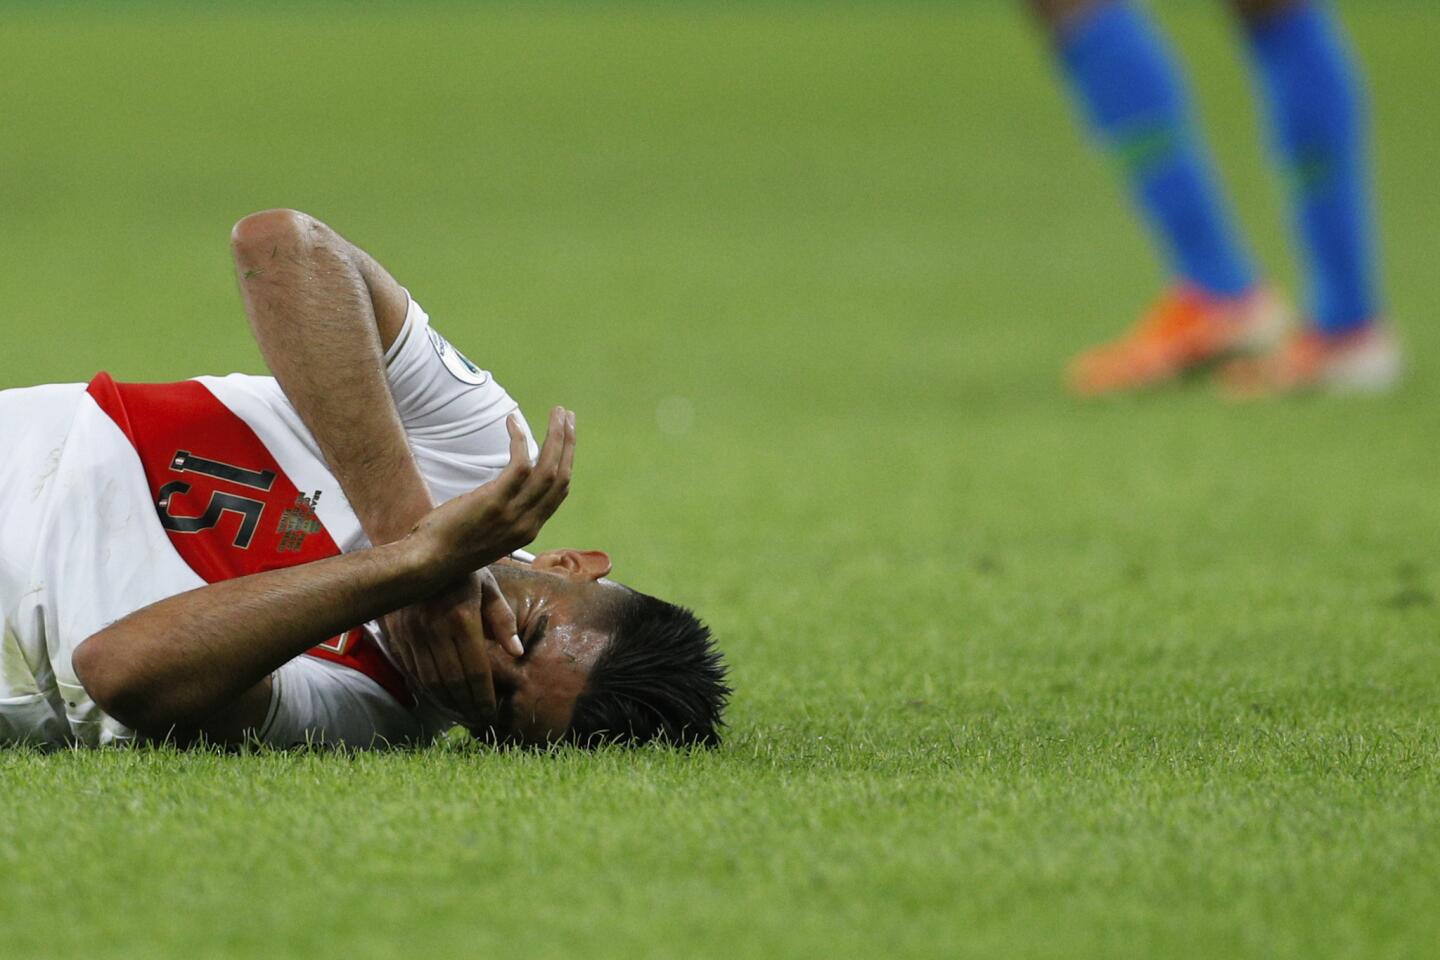 Peru's Carlos Zambrano reacts after colliding with Brazil's Gabriel Jesus during the final soccer match of the Copa America at the Maracana stadium in Rio de Janeiro, Brazil, Sunday, July 7, 2019.